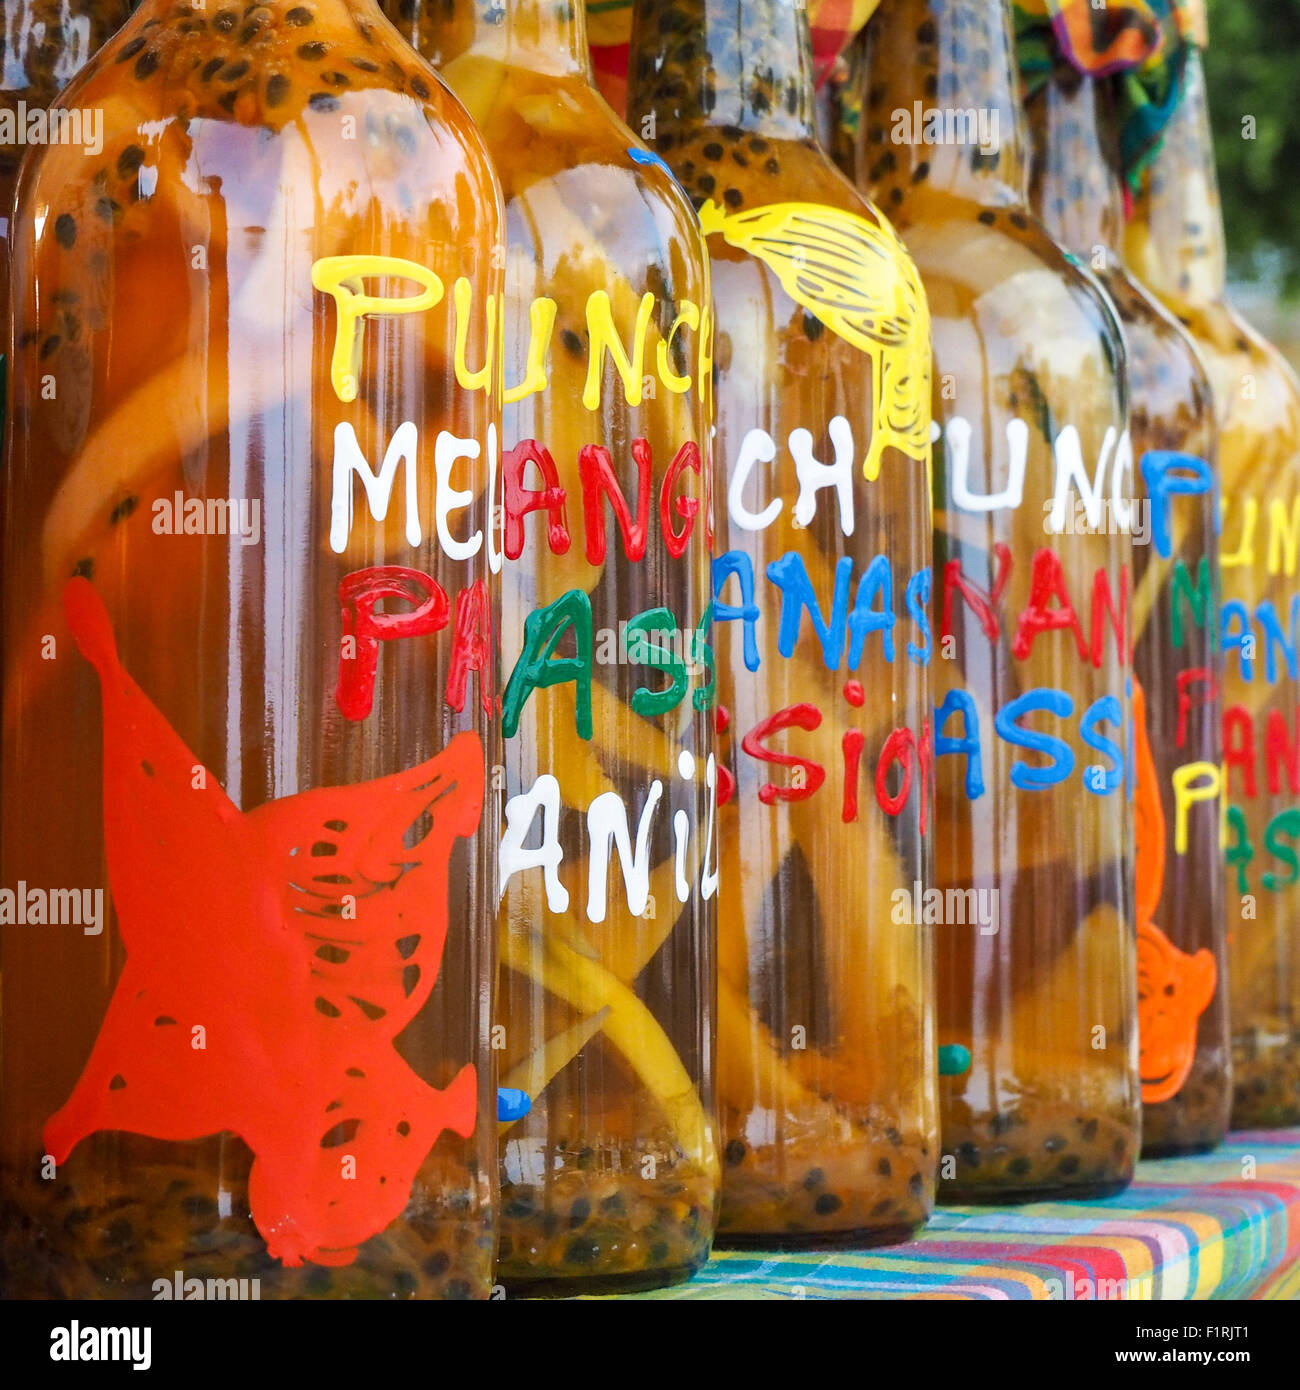 Traditional flavored rhum bottles on the desk of a market stall in Sainte Anne, Guadeloupe Stock Photo